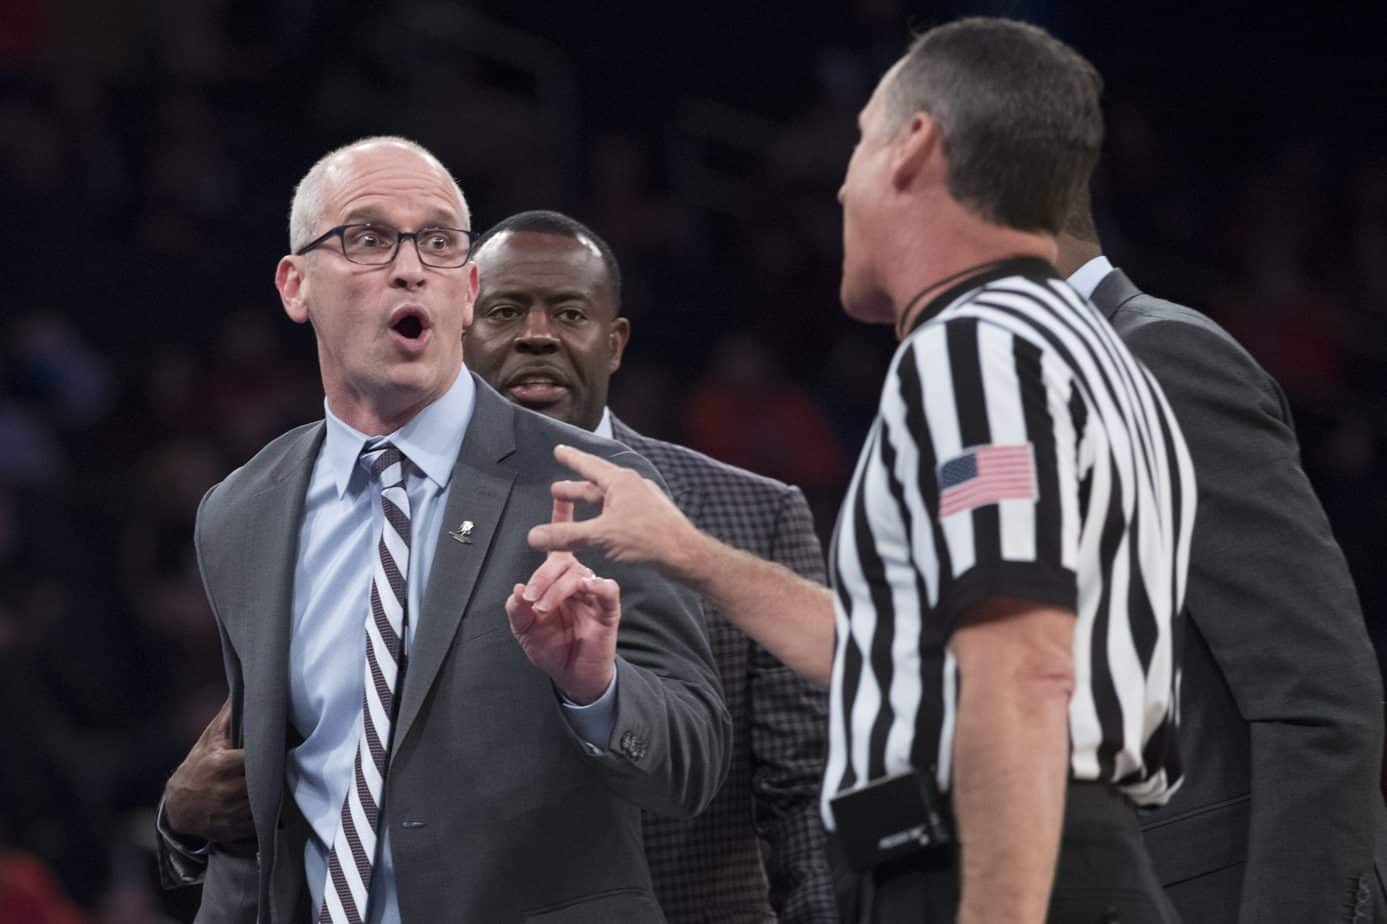 College basketball refs are under fire on Tuesday night after UCONN head coach Dan Hurley was ejected for hyping up his crowd during the Villanova game